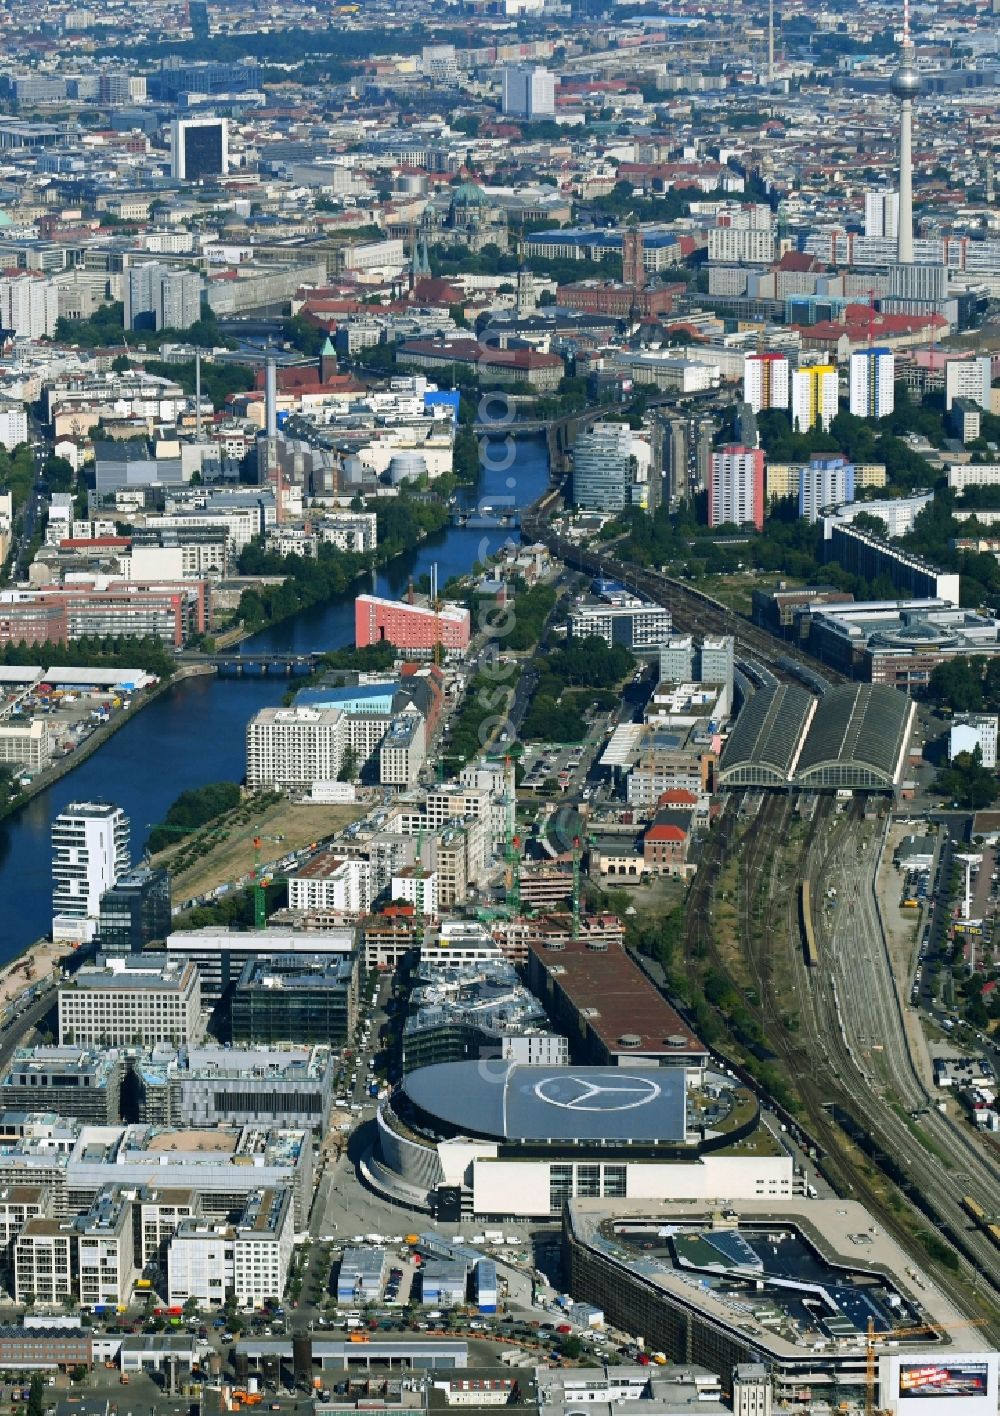 Aerial photograph Berlin - Arena Mercedes-Benz-Arena on Friedrichshain part of Berlin. The former O2 World - now Mercedes-Benz-Arena - is located in the Anschutz Areal, a business and office space on the riverbank